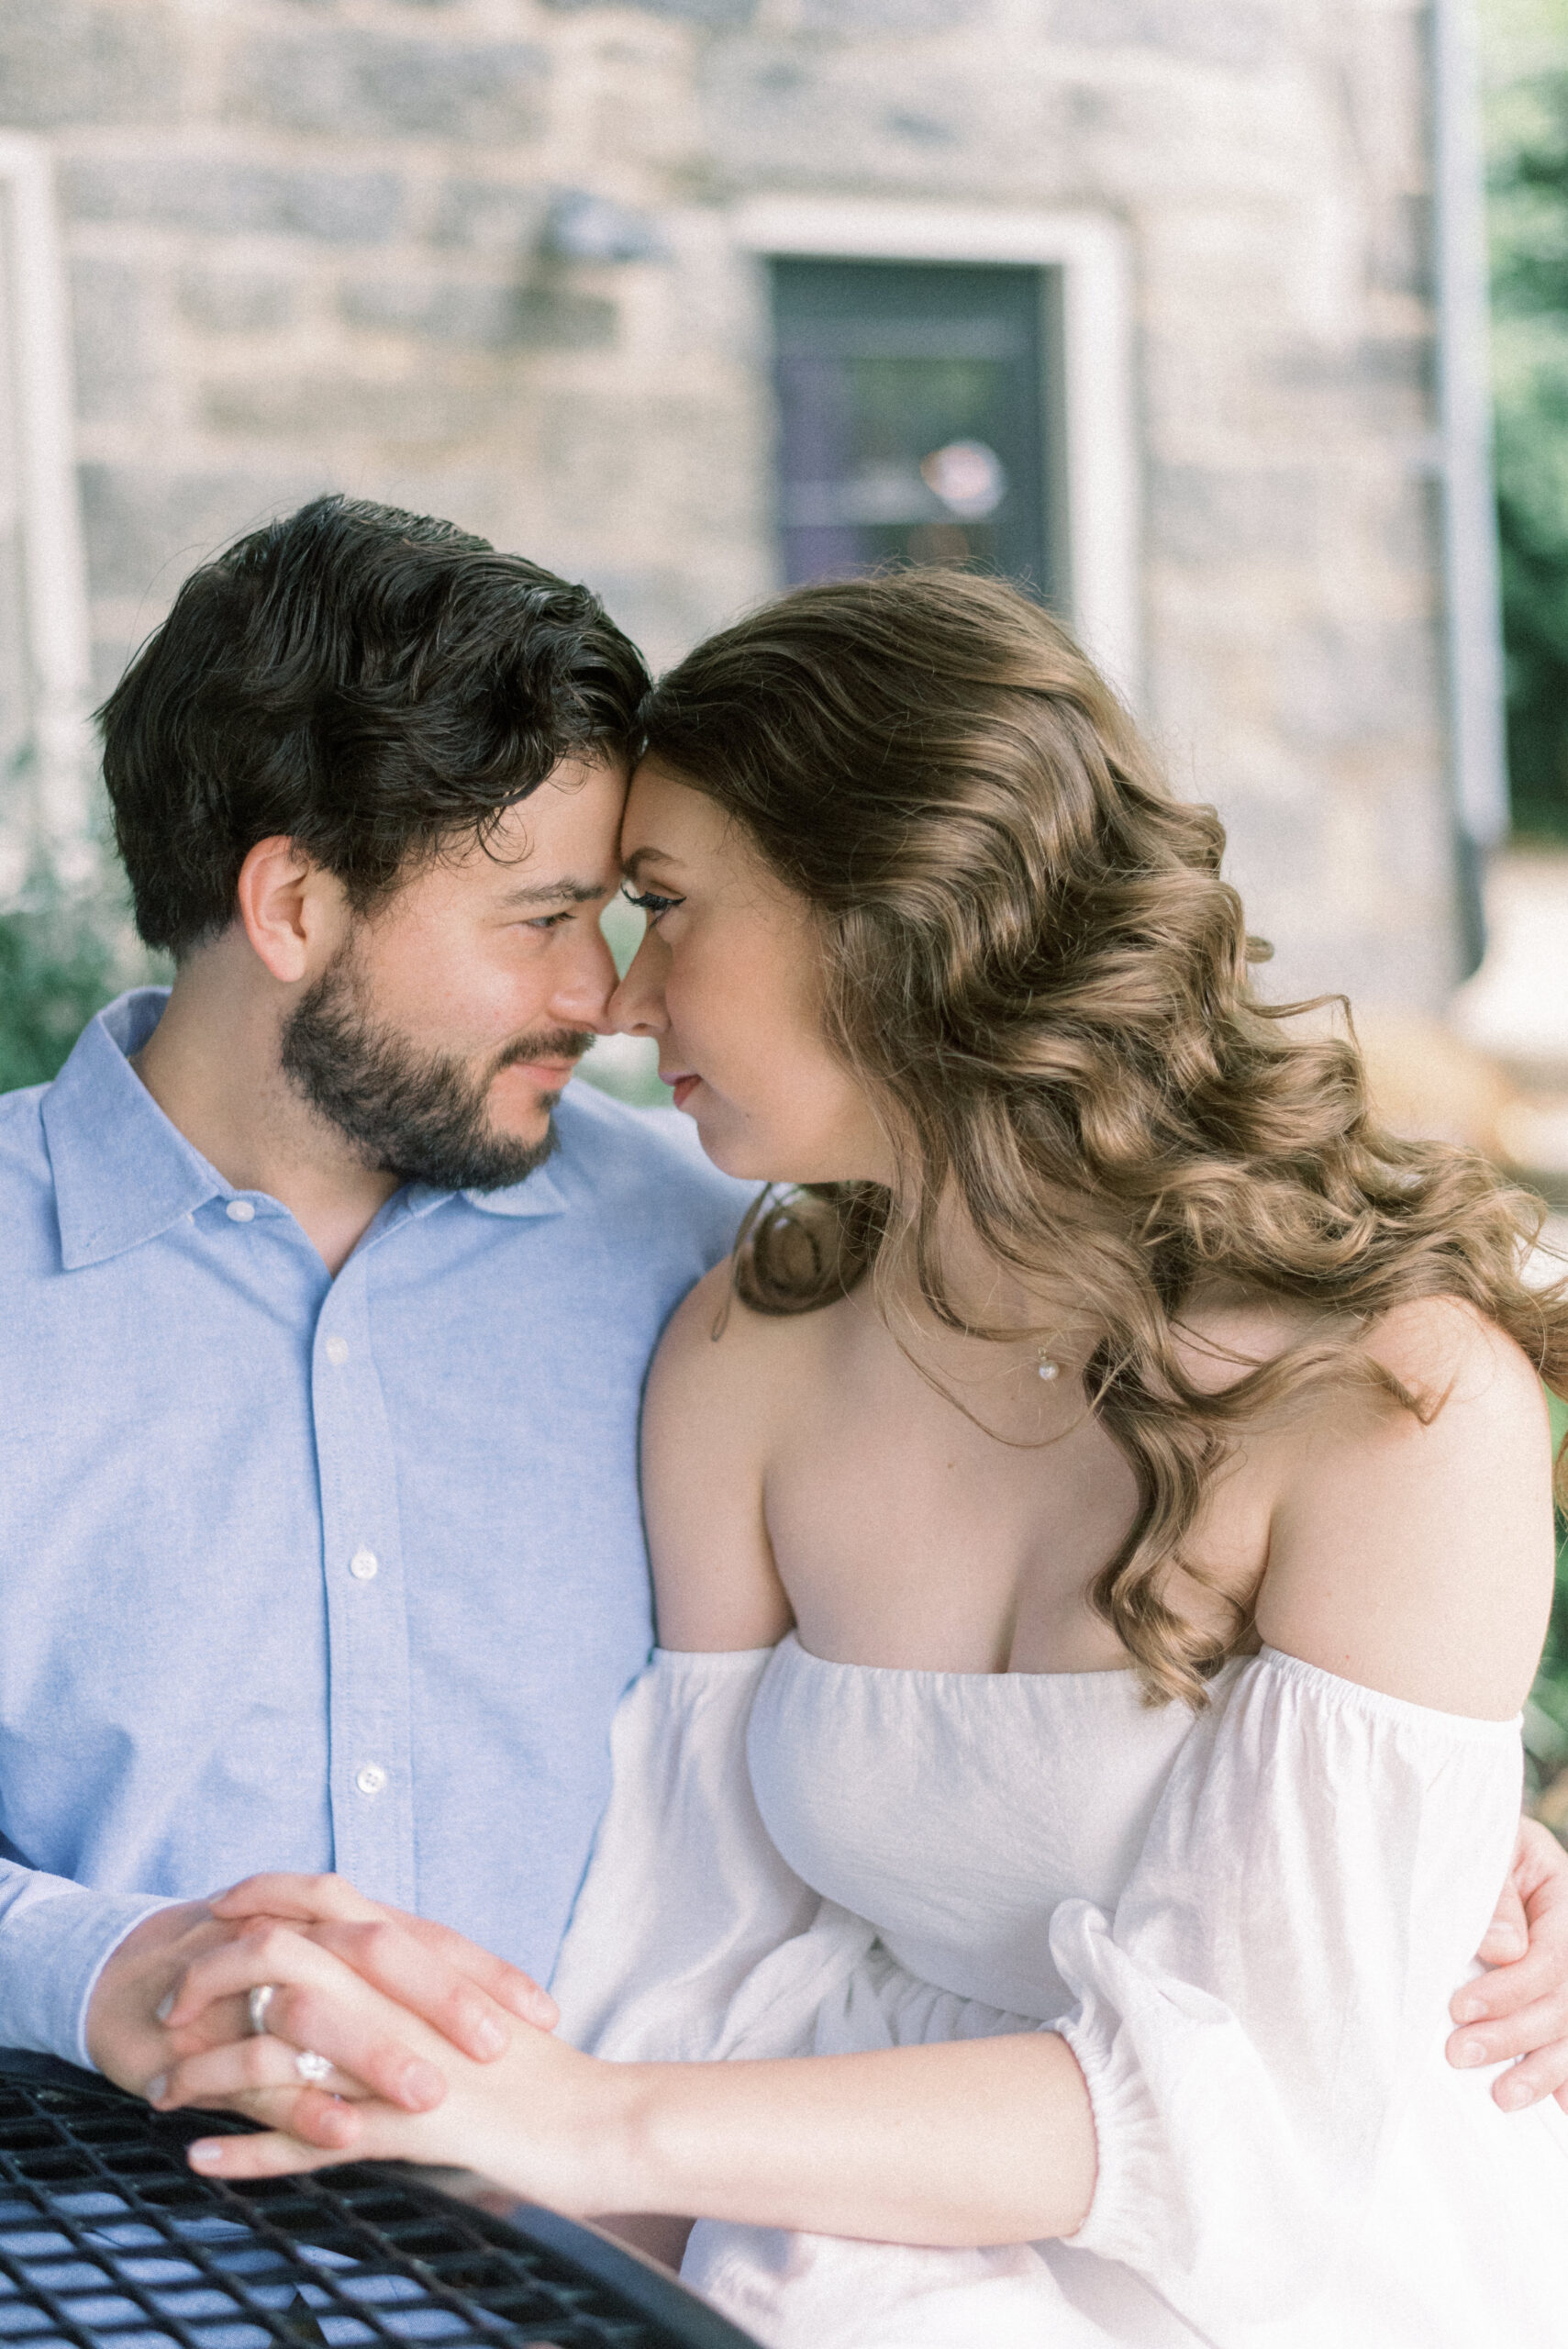 Maryland wedding photographer captures couple nose to nose during outdoor engagement photos